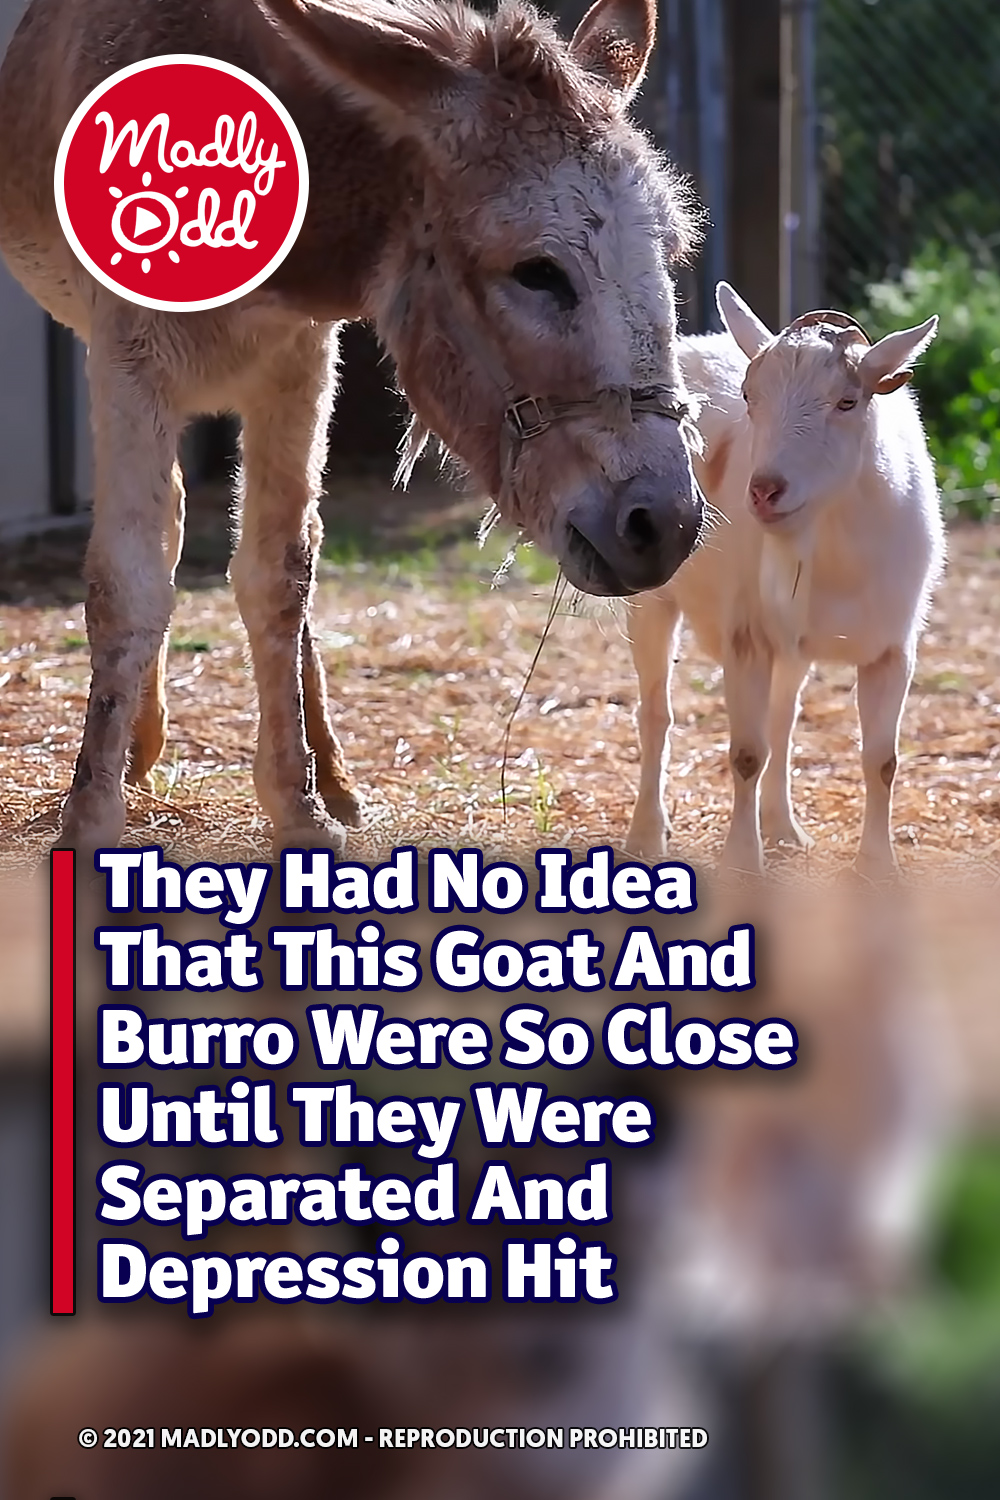 They Had No Idea That This Goat And Burro Were So Close Until They Were Separated And Depression Hit